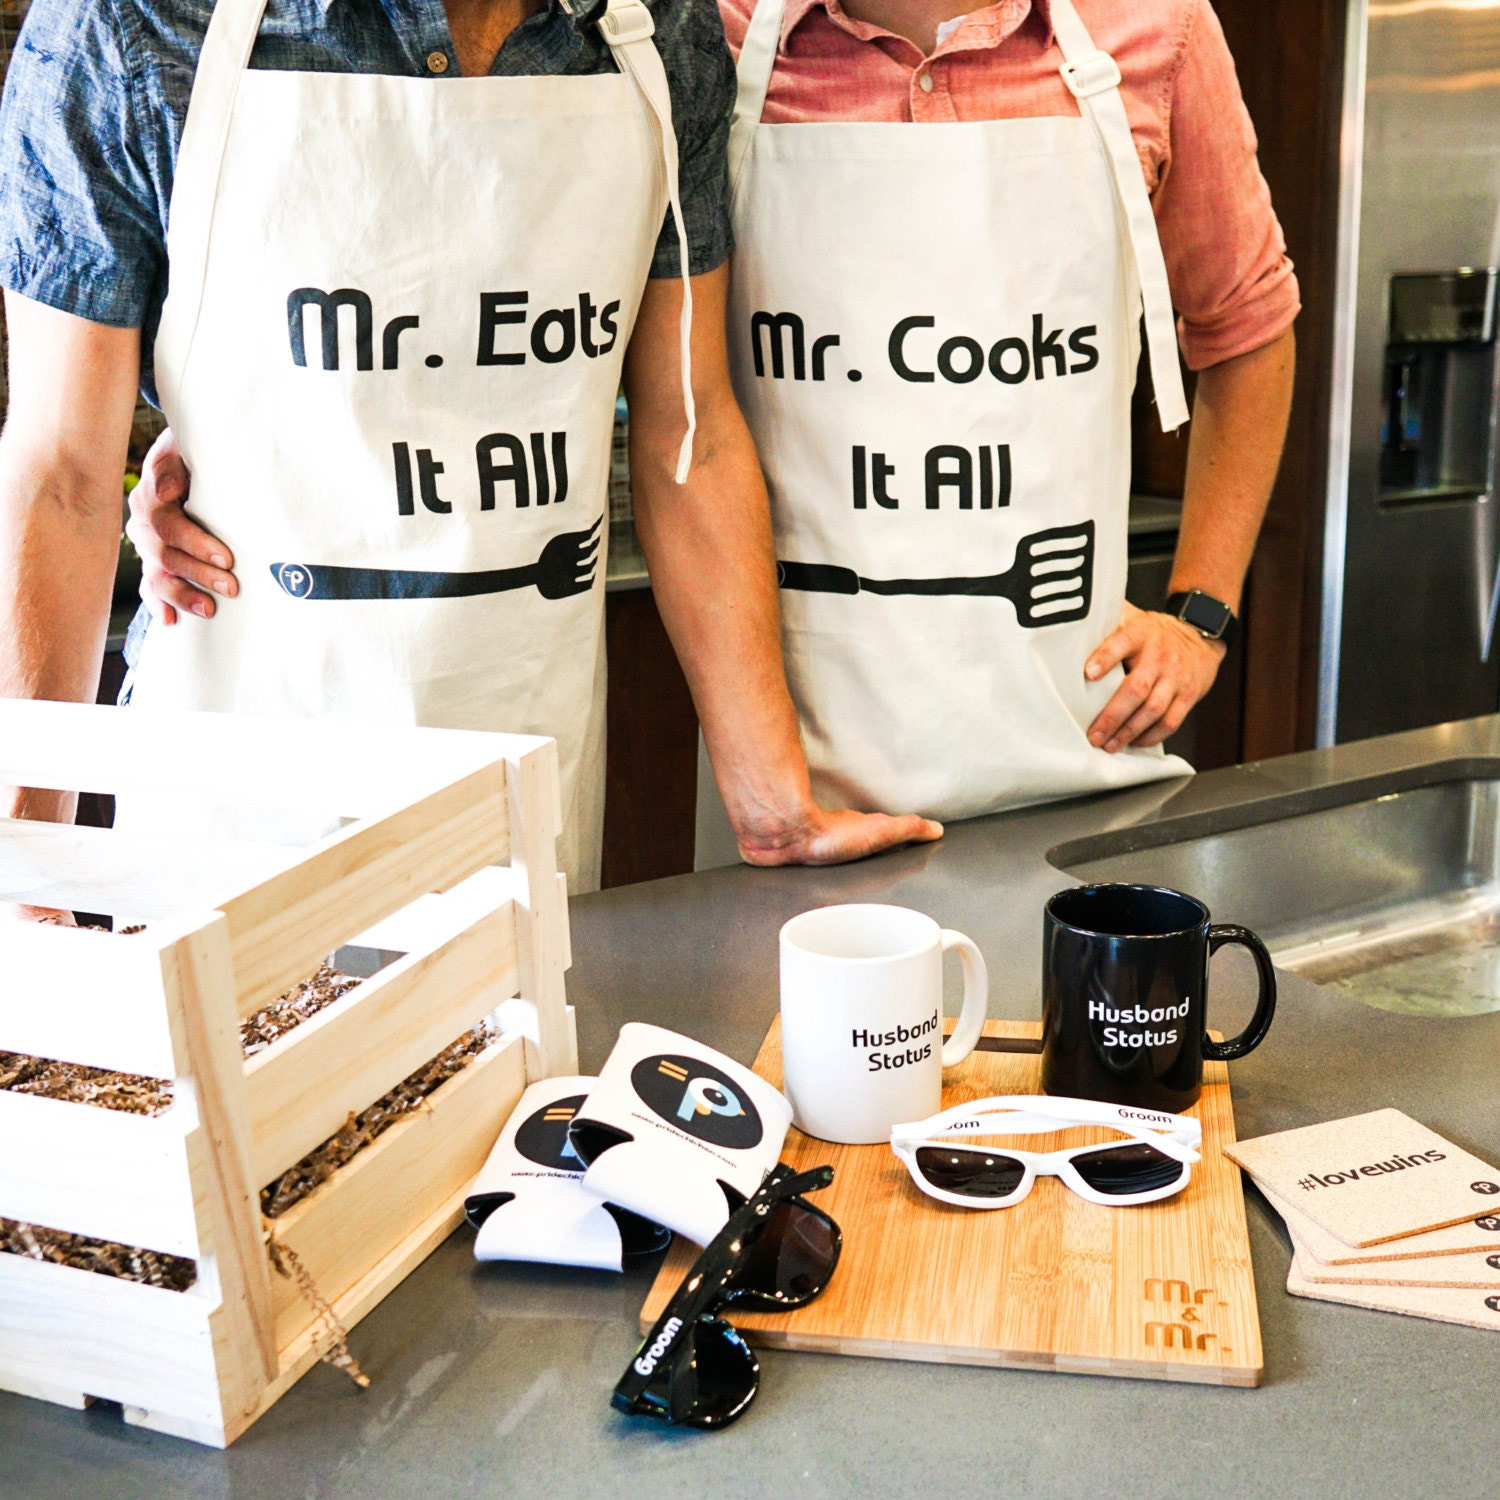 Engagement Gift Ideas For Young Couples
 Gay Couple Kitchen Crate Makes a Great Gay Wedding Gift